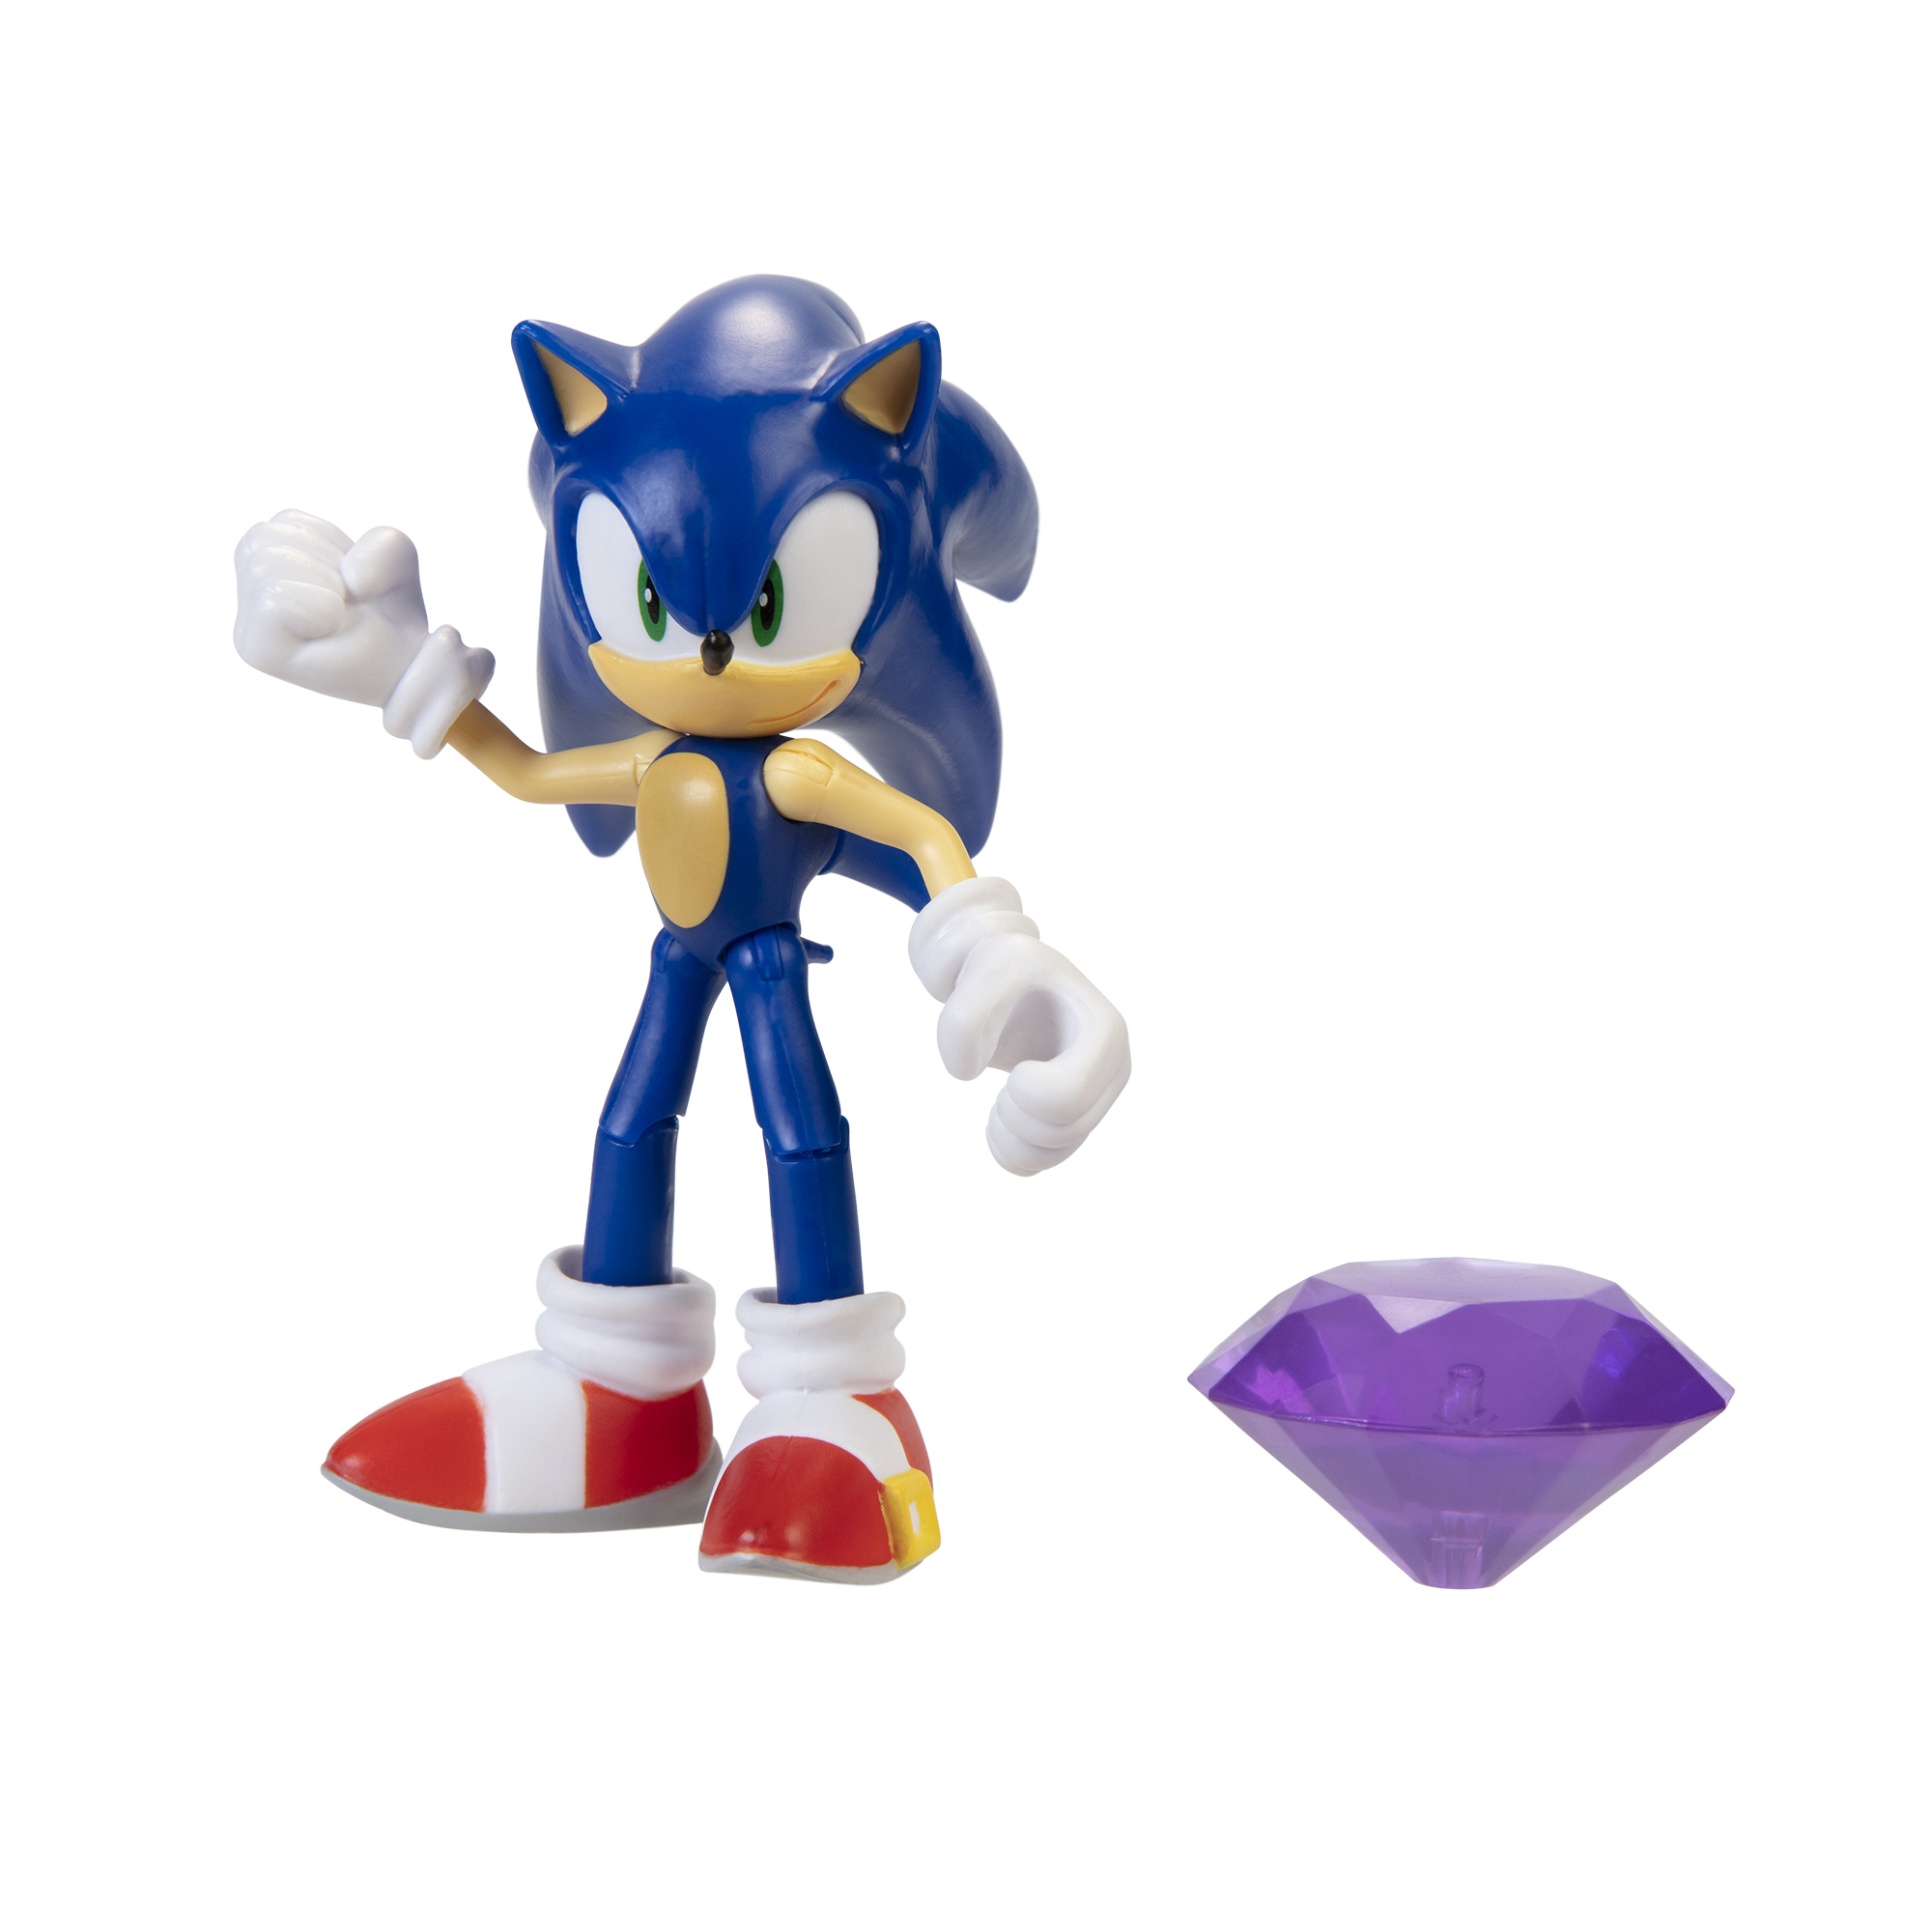 4" Articulated Figures w/ accessory Wave 3 (Sonic w/ Chaos Emerald)